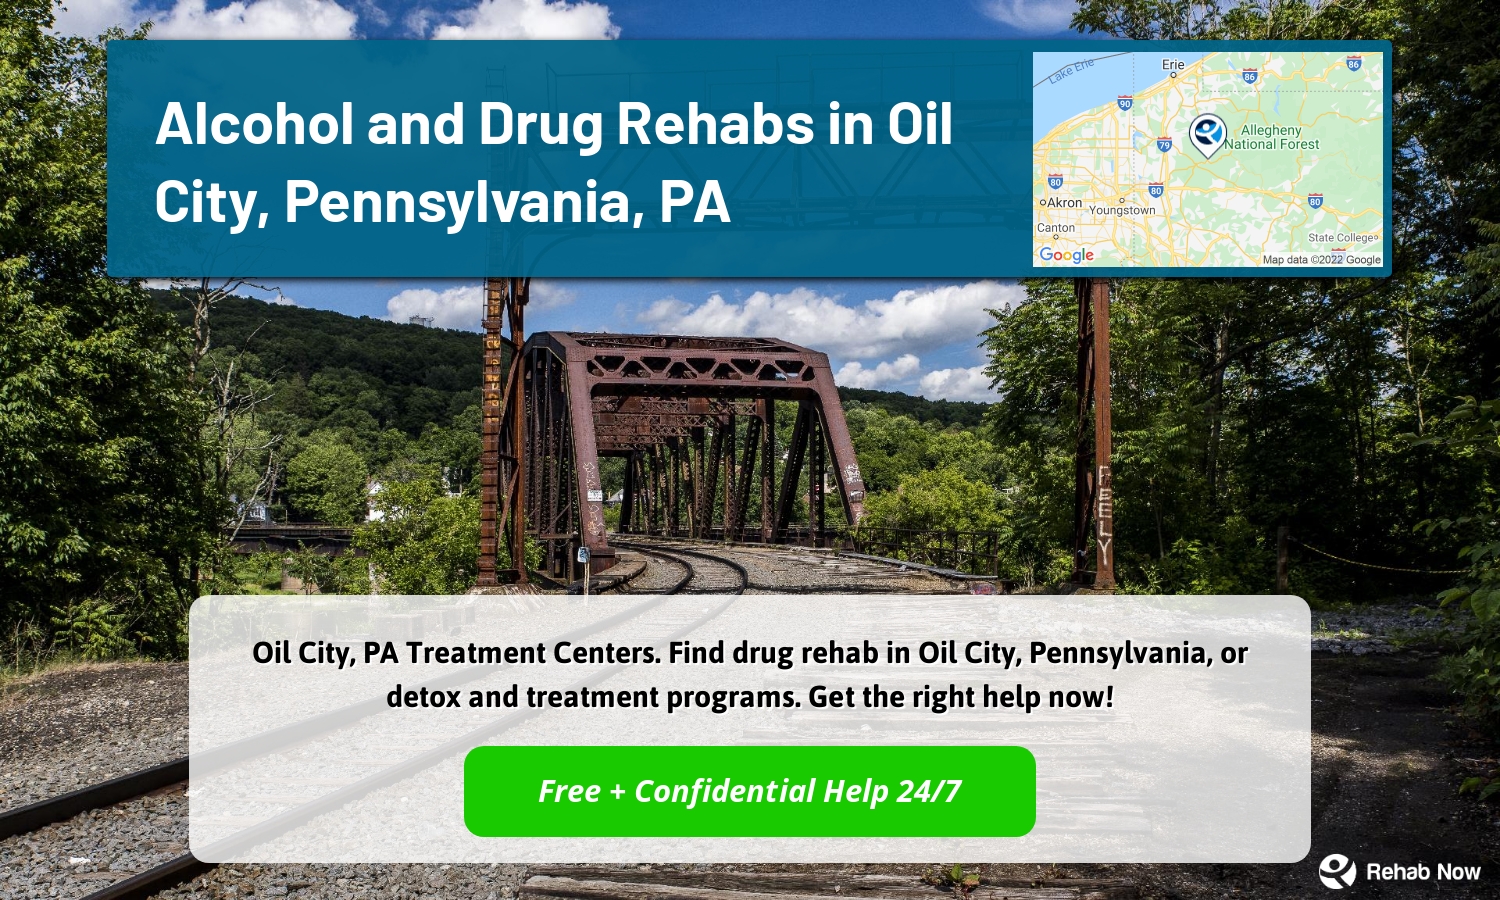 Oil City, PA Treatment Centers. Find drug rehab in Oil City, Pennsylvania, or detox and treatment programs. Get the right help now!